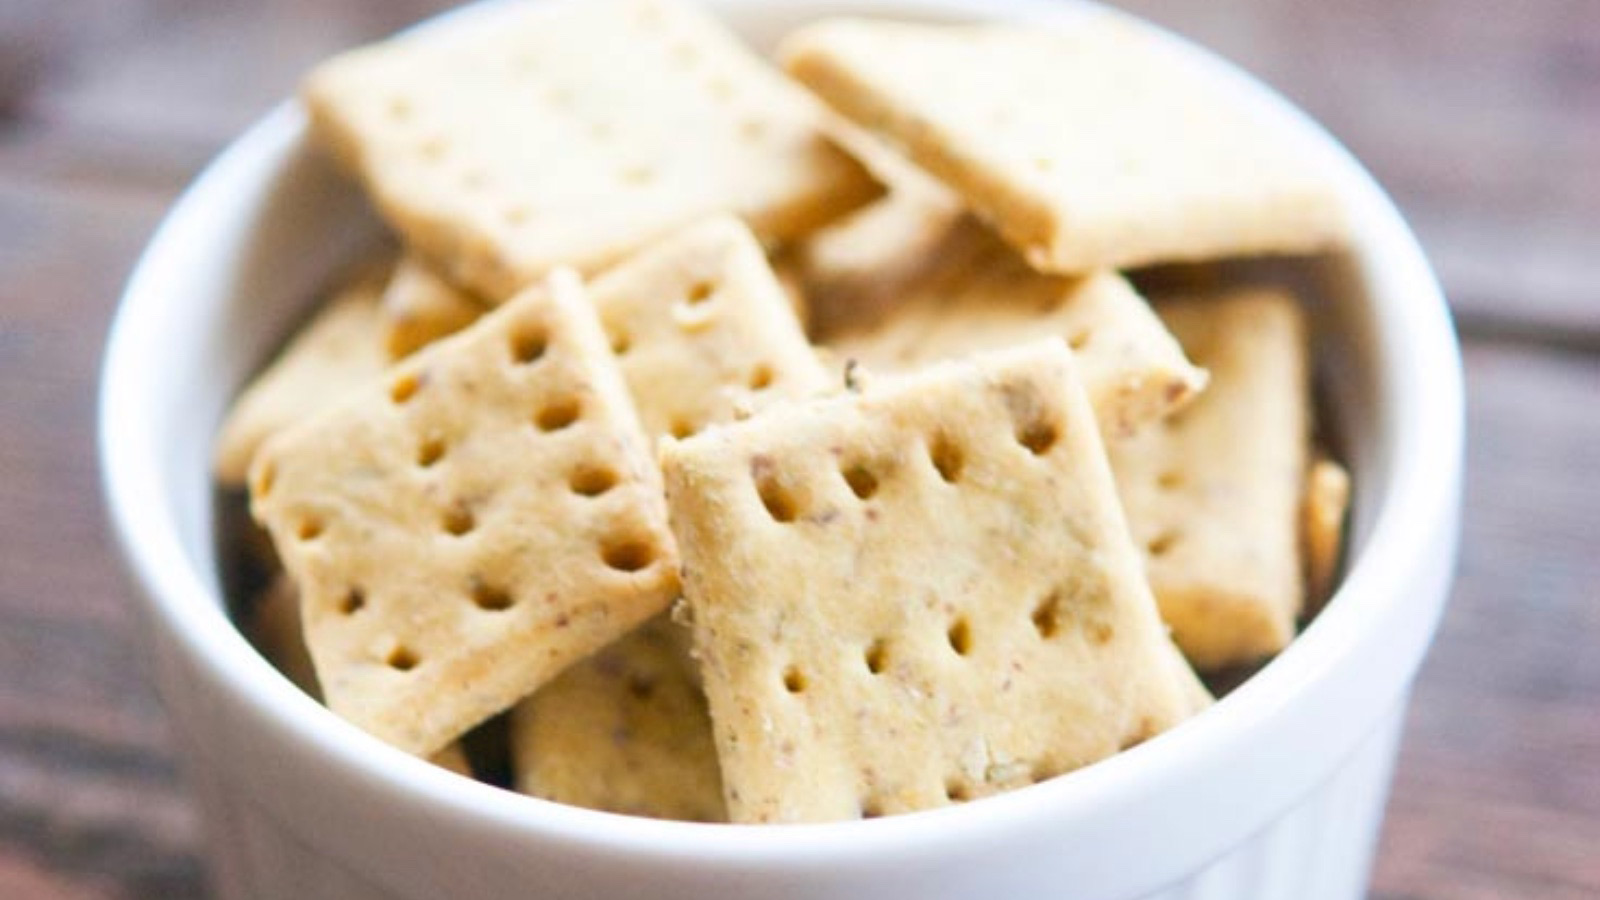 <p>These grain-free <a href="https://www.thegraciouspantry.com/clean-eating-grain-free-rosemary-crackers-recipe/">rosemary crackers</a> are a delicious and healthy take-along snack that doesn’t require any refrigeration. A single batch makes quite a few crackers, so make a batch before you hit the road, and you’ll be all set. </p>